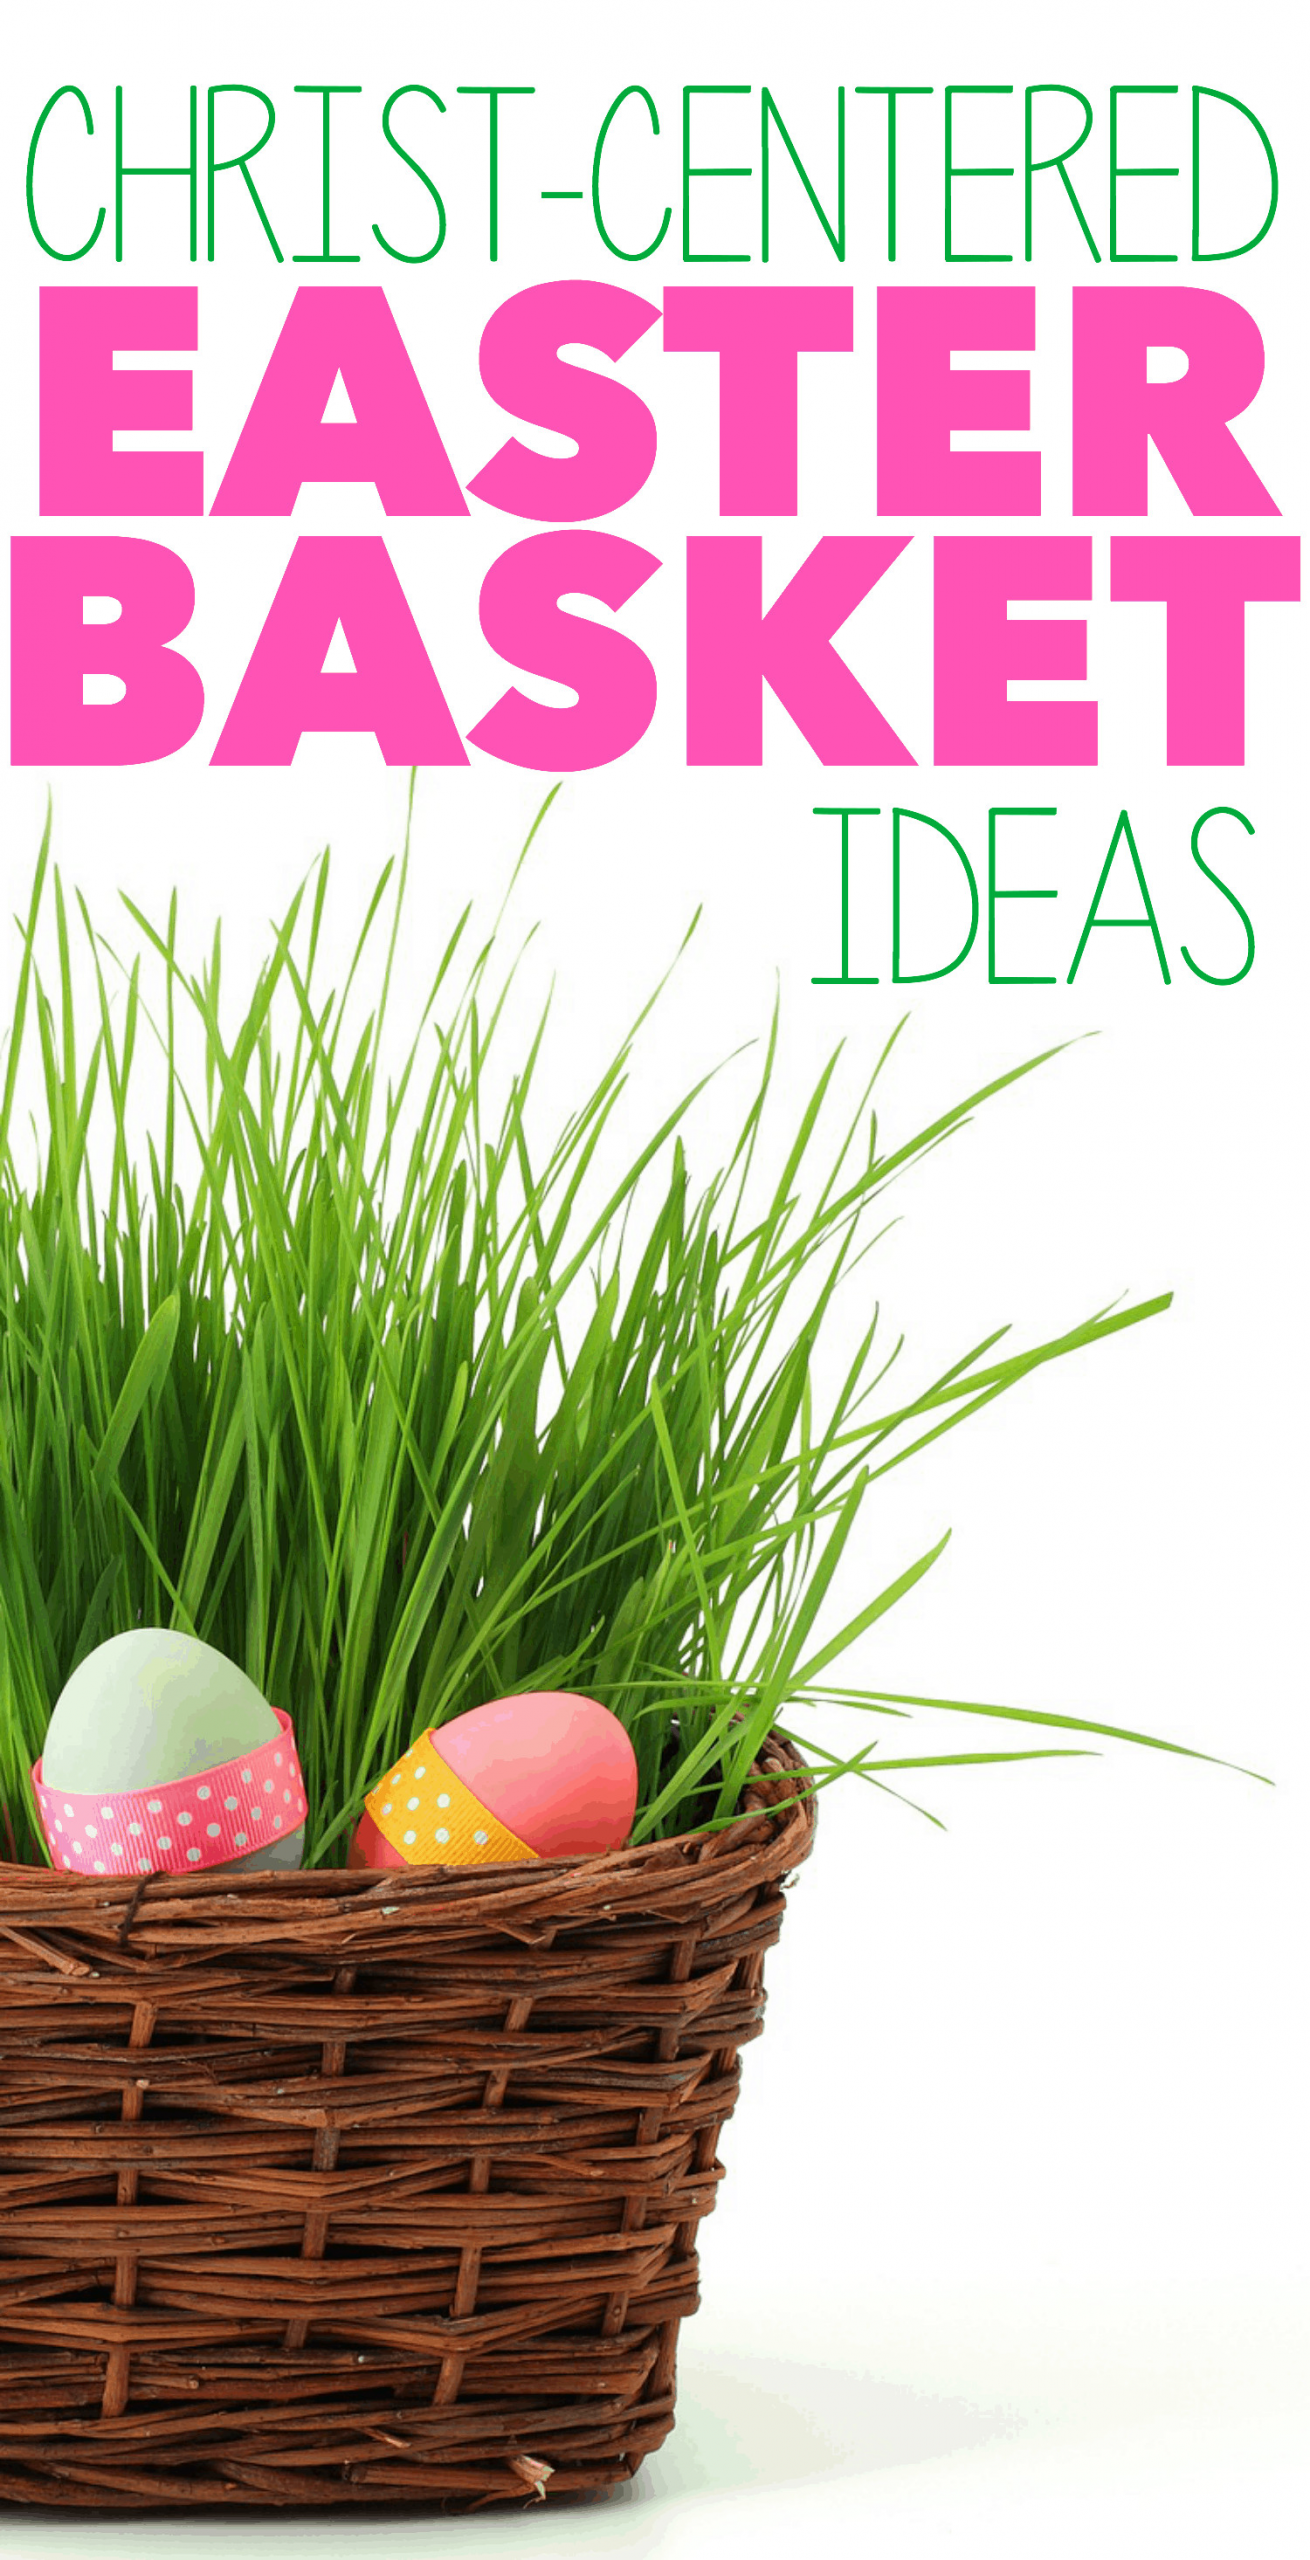 Religious Easter Gifts
 Christ Centered Easter Basket Ideas